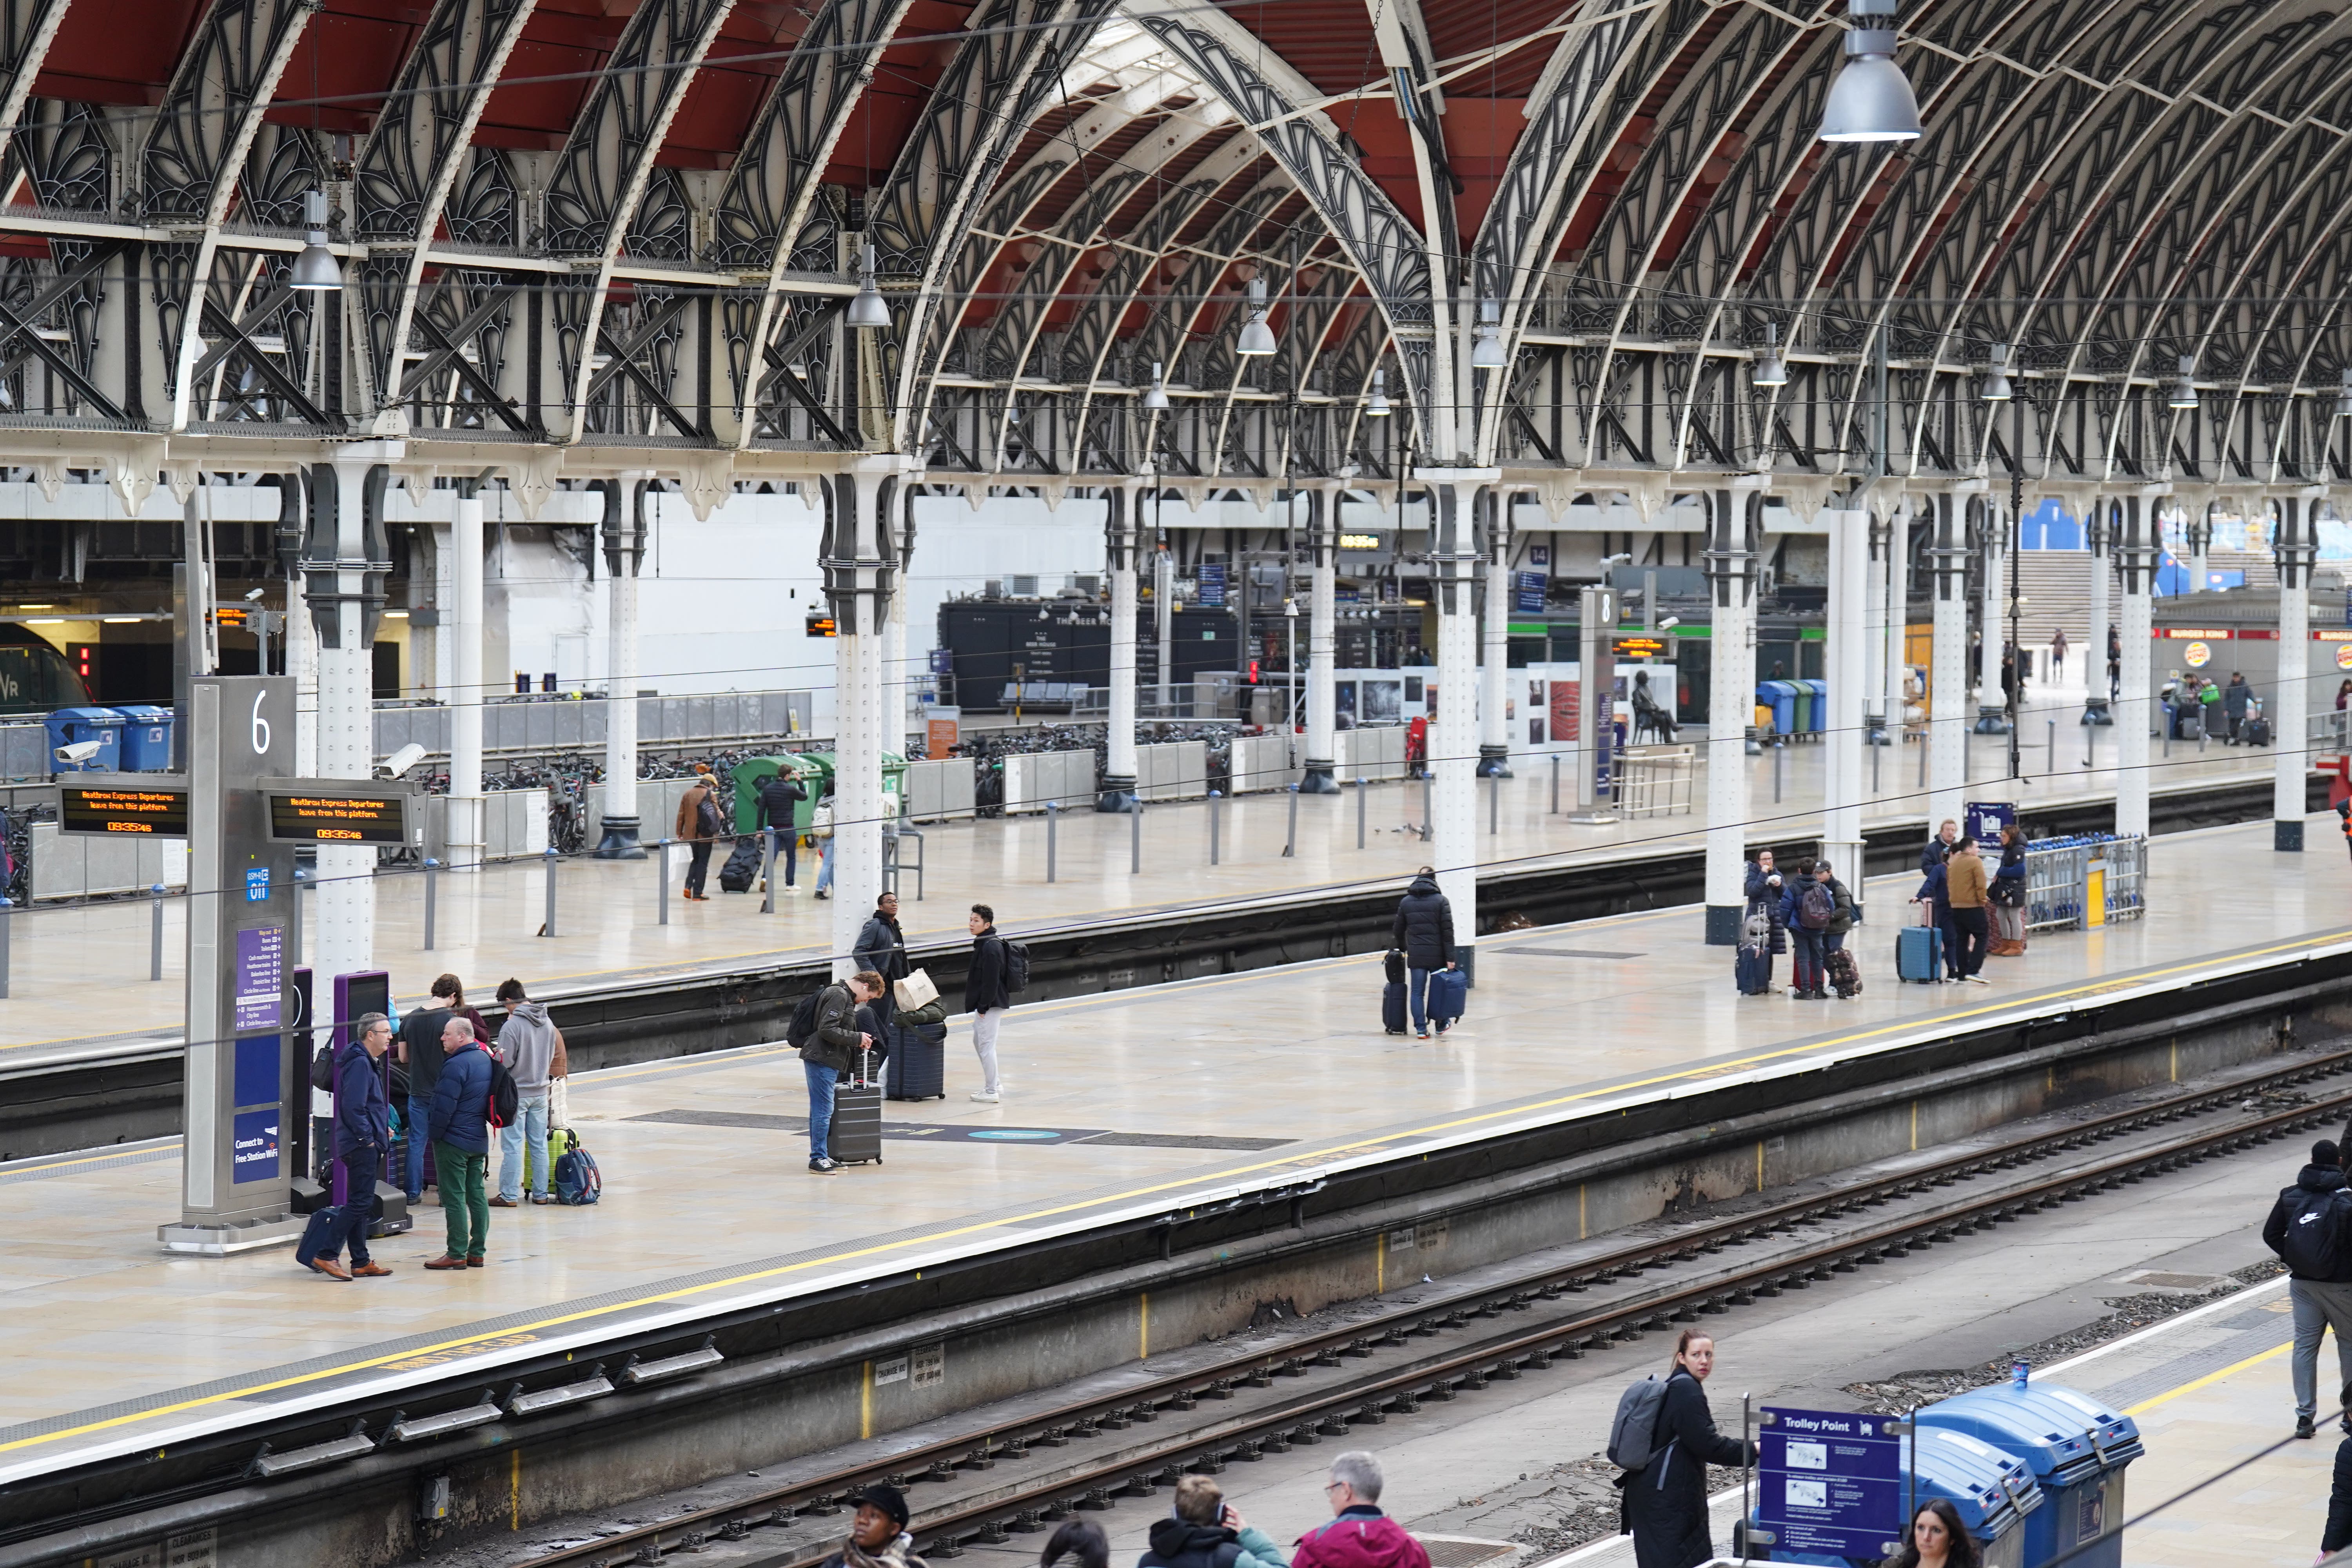 Rails strikes by the train drivers’ union are playing havoc with timetables this week